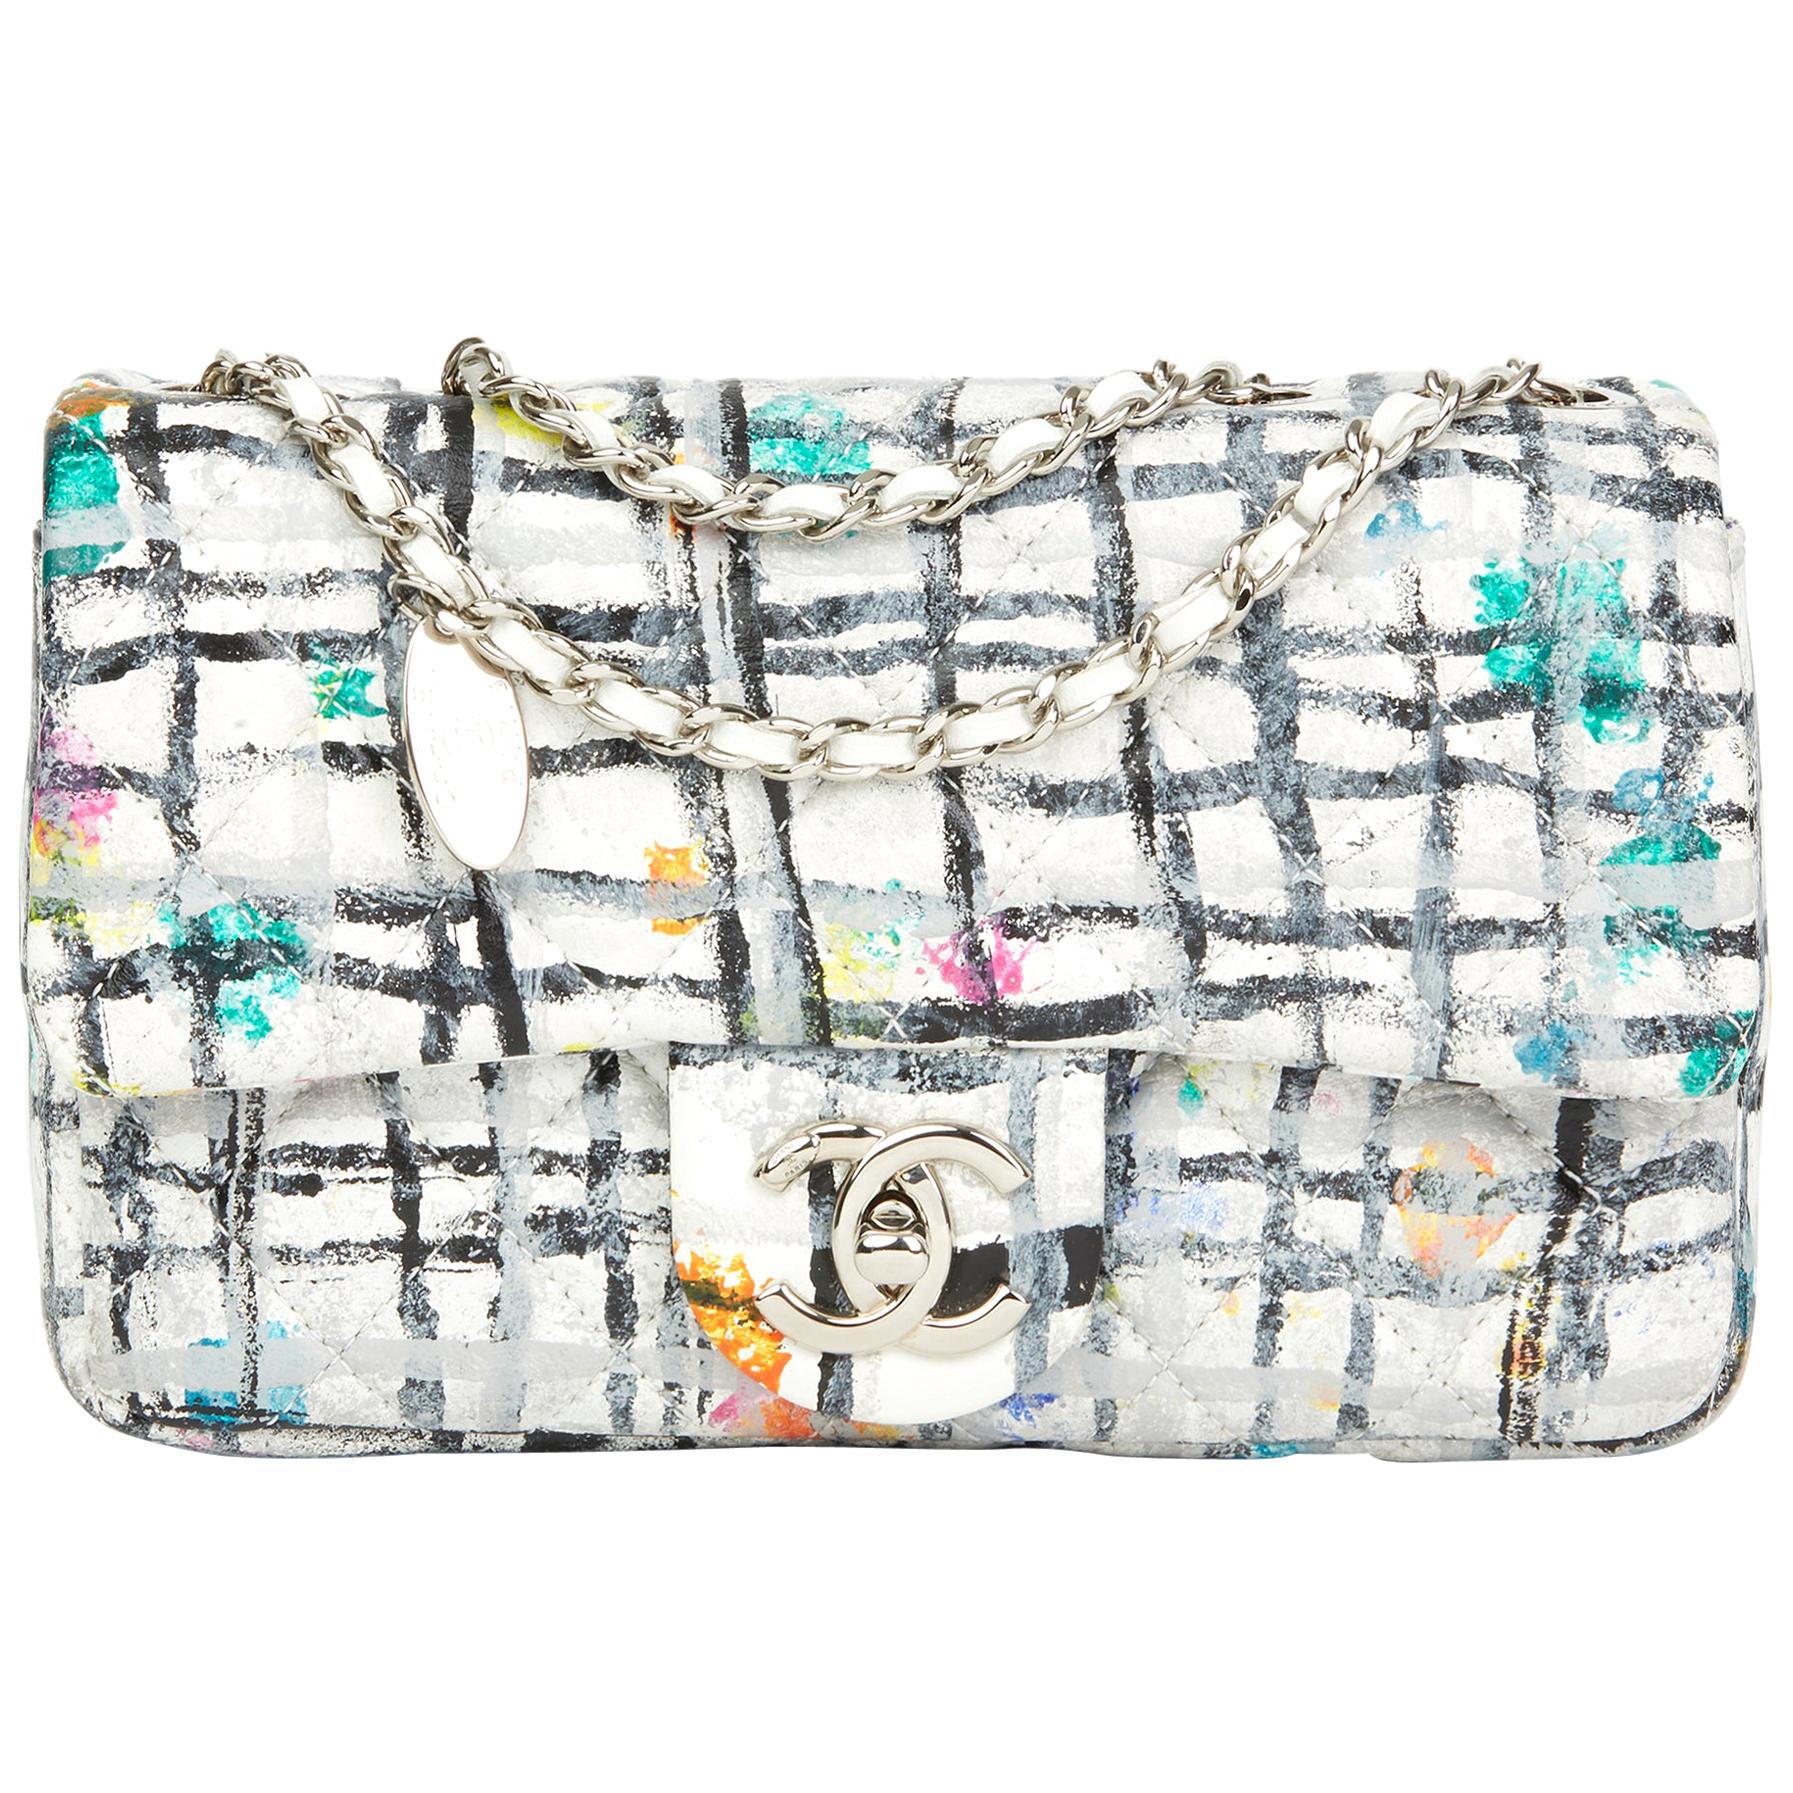 2014 Chanel Multicolour Hand-painted Quilted Lambskin Graffiti Mini Flap Bag